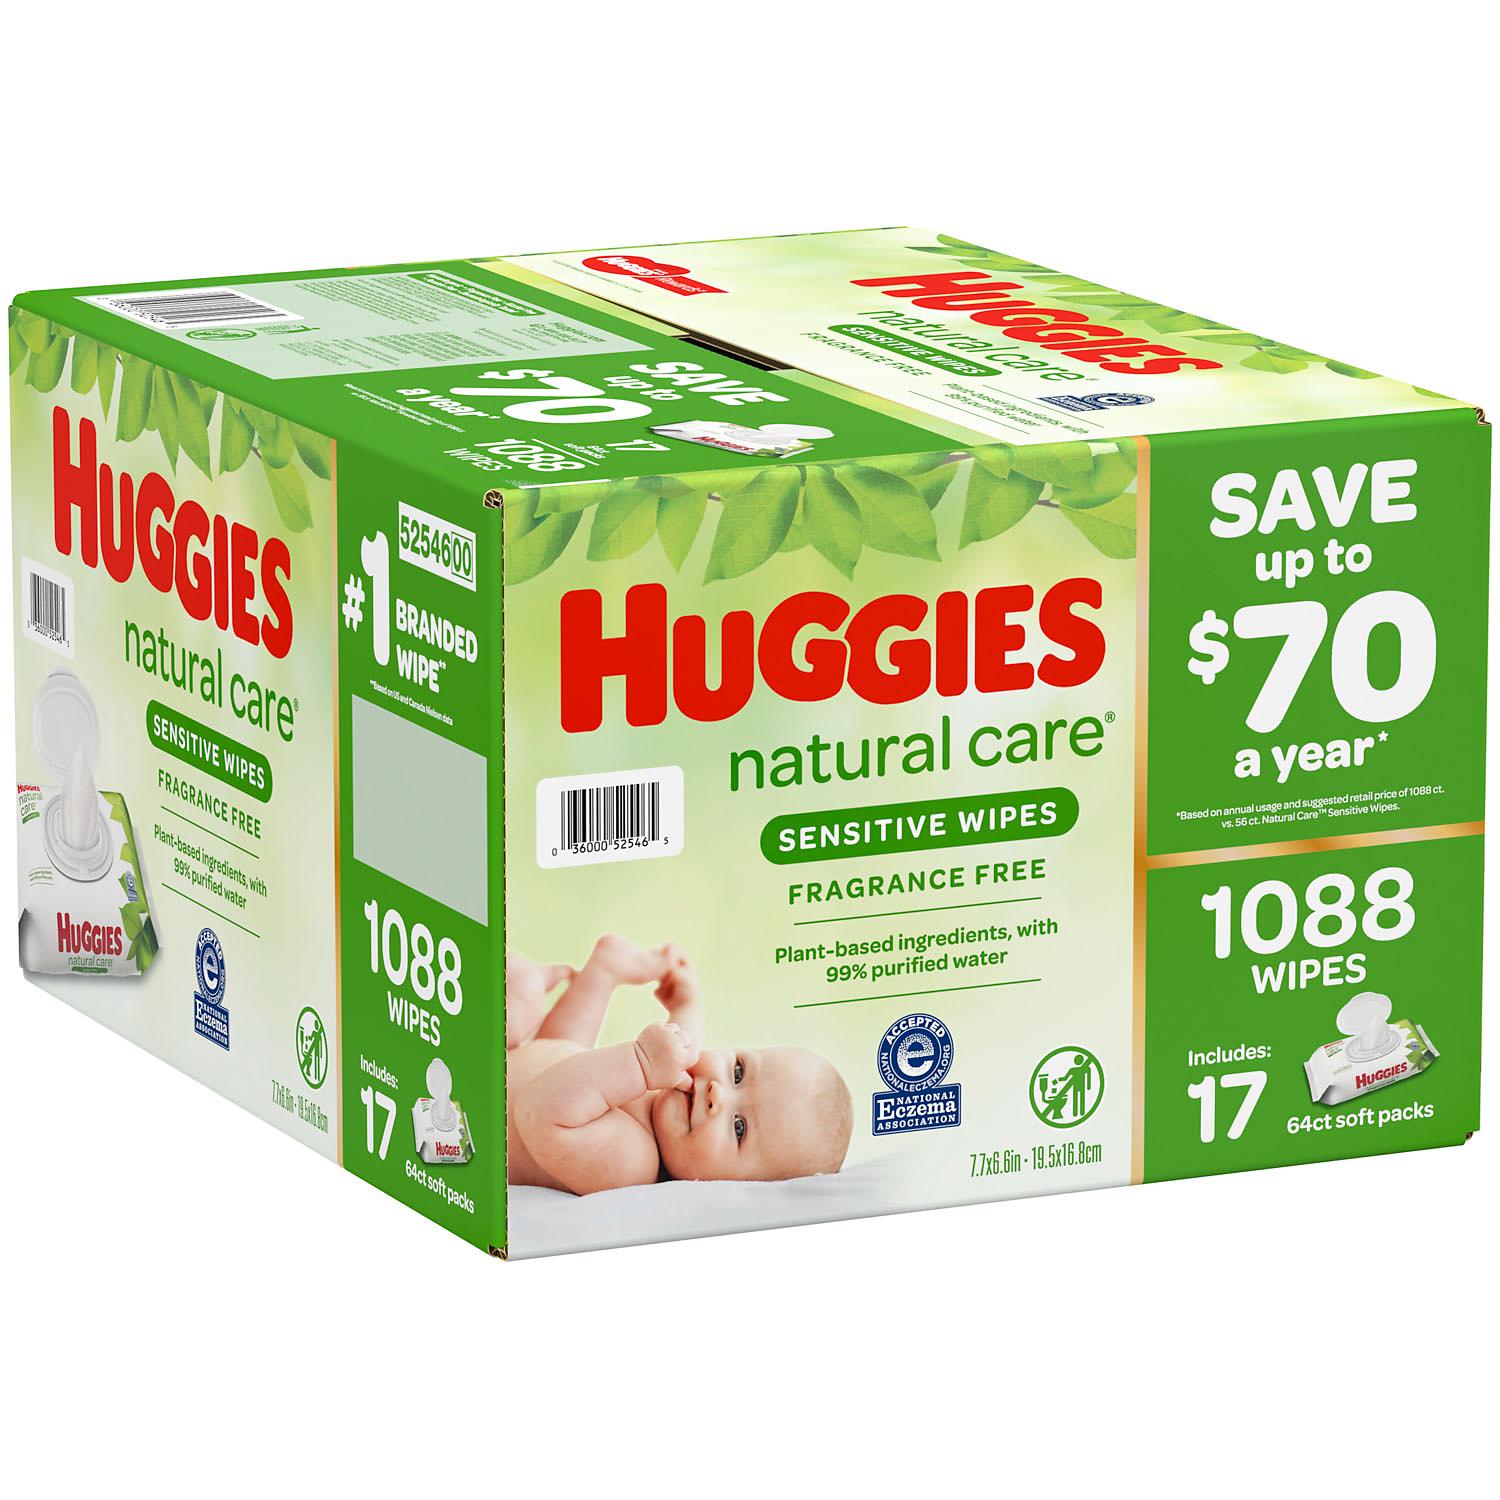 Huggies Natural Care Sensitive Baby Wipes, Unscented, (17 flip-top pks., 1088 wipes) - image 2 of 3